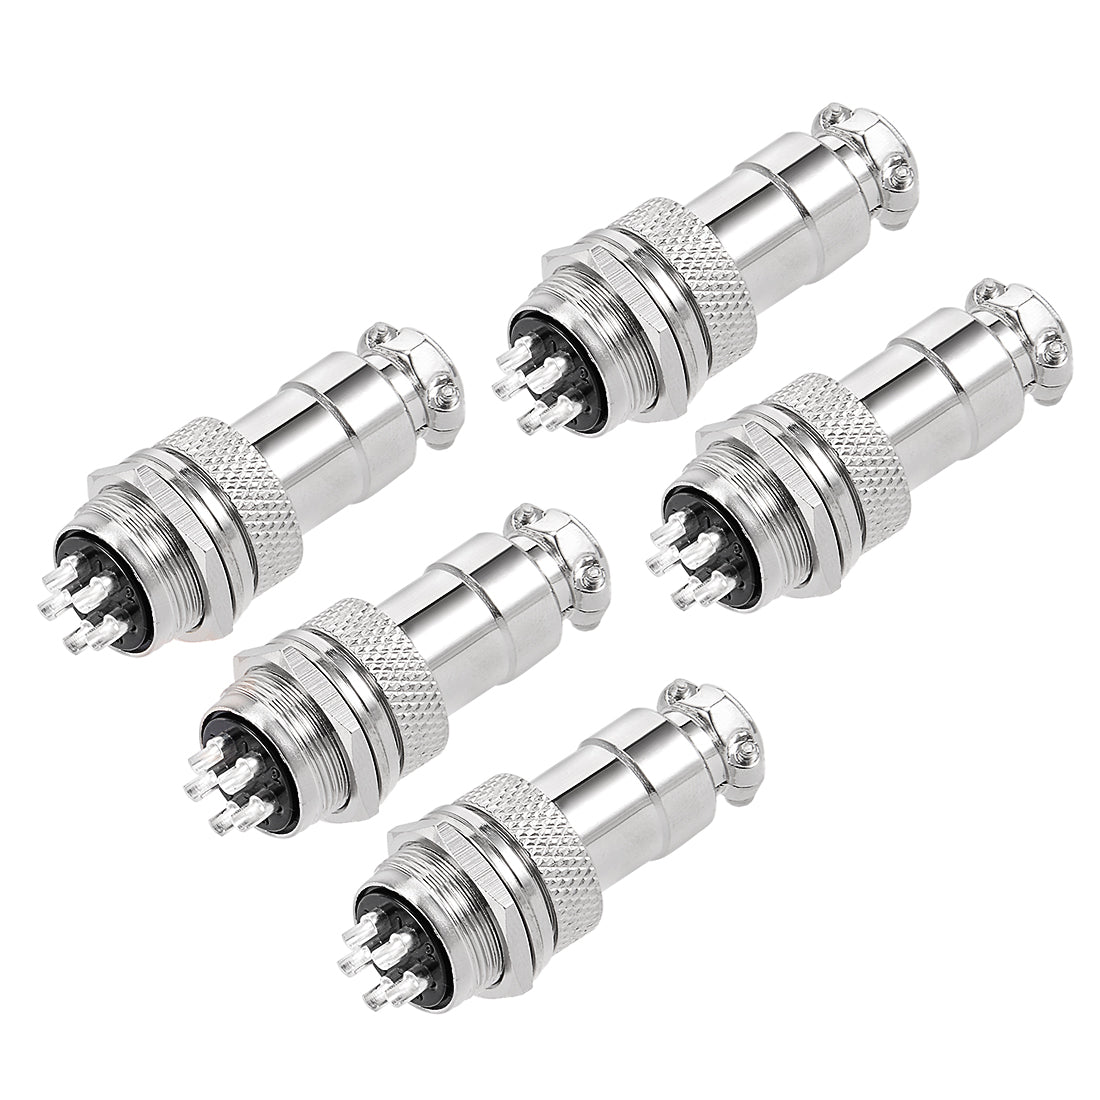 uxcell Uxcell 5pcs Aviation Connector, 20mm 5P 10A 150V GX20-5 Waterproof Male Wire Panel Power Chassis Metal Fittings Connector Aviation Silver Tone